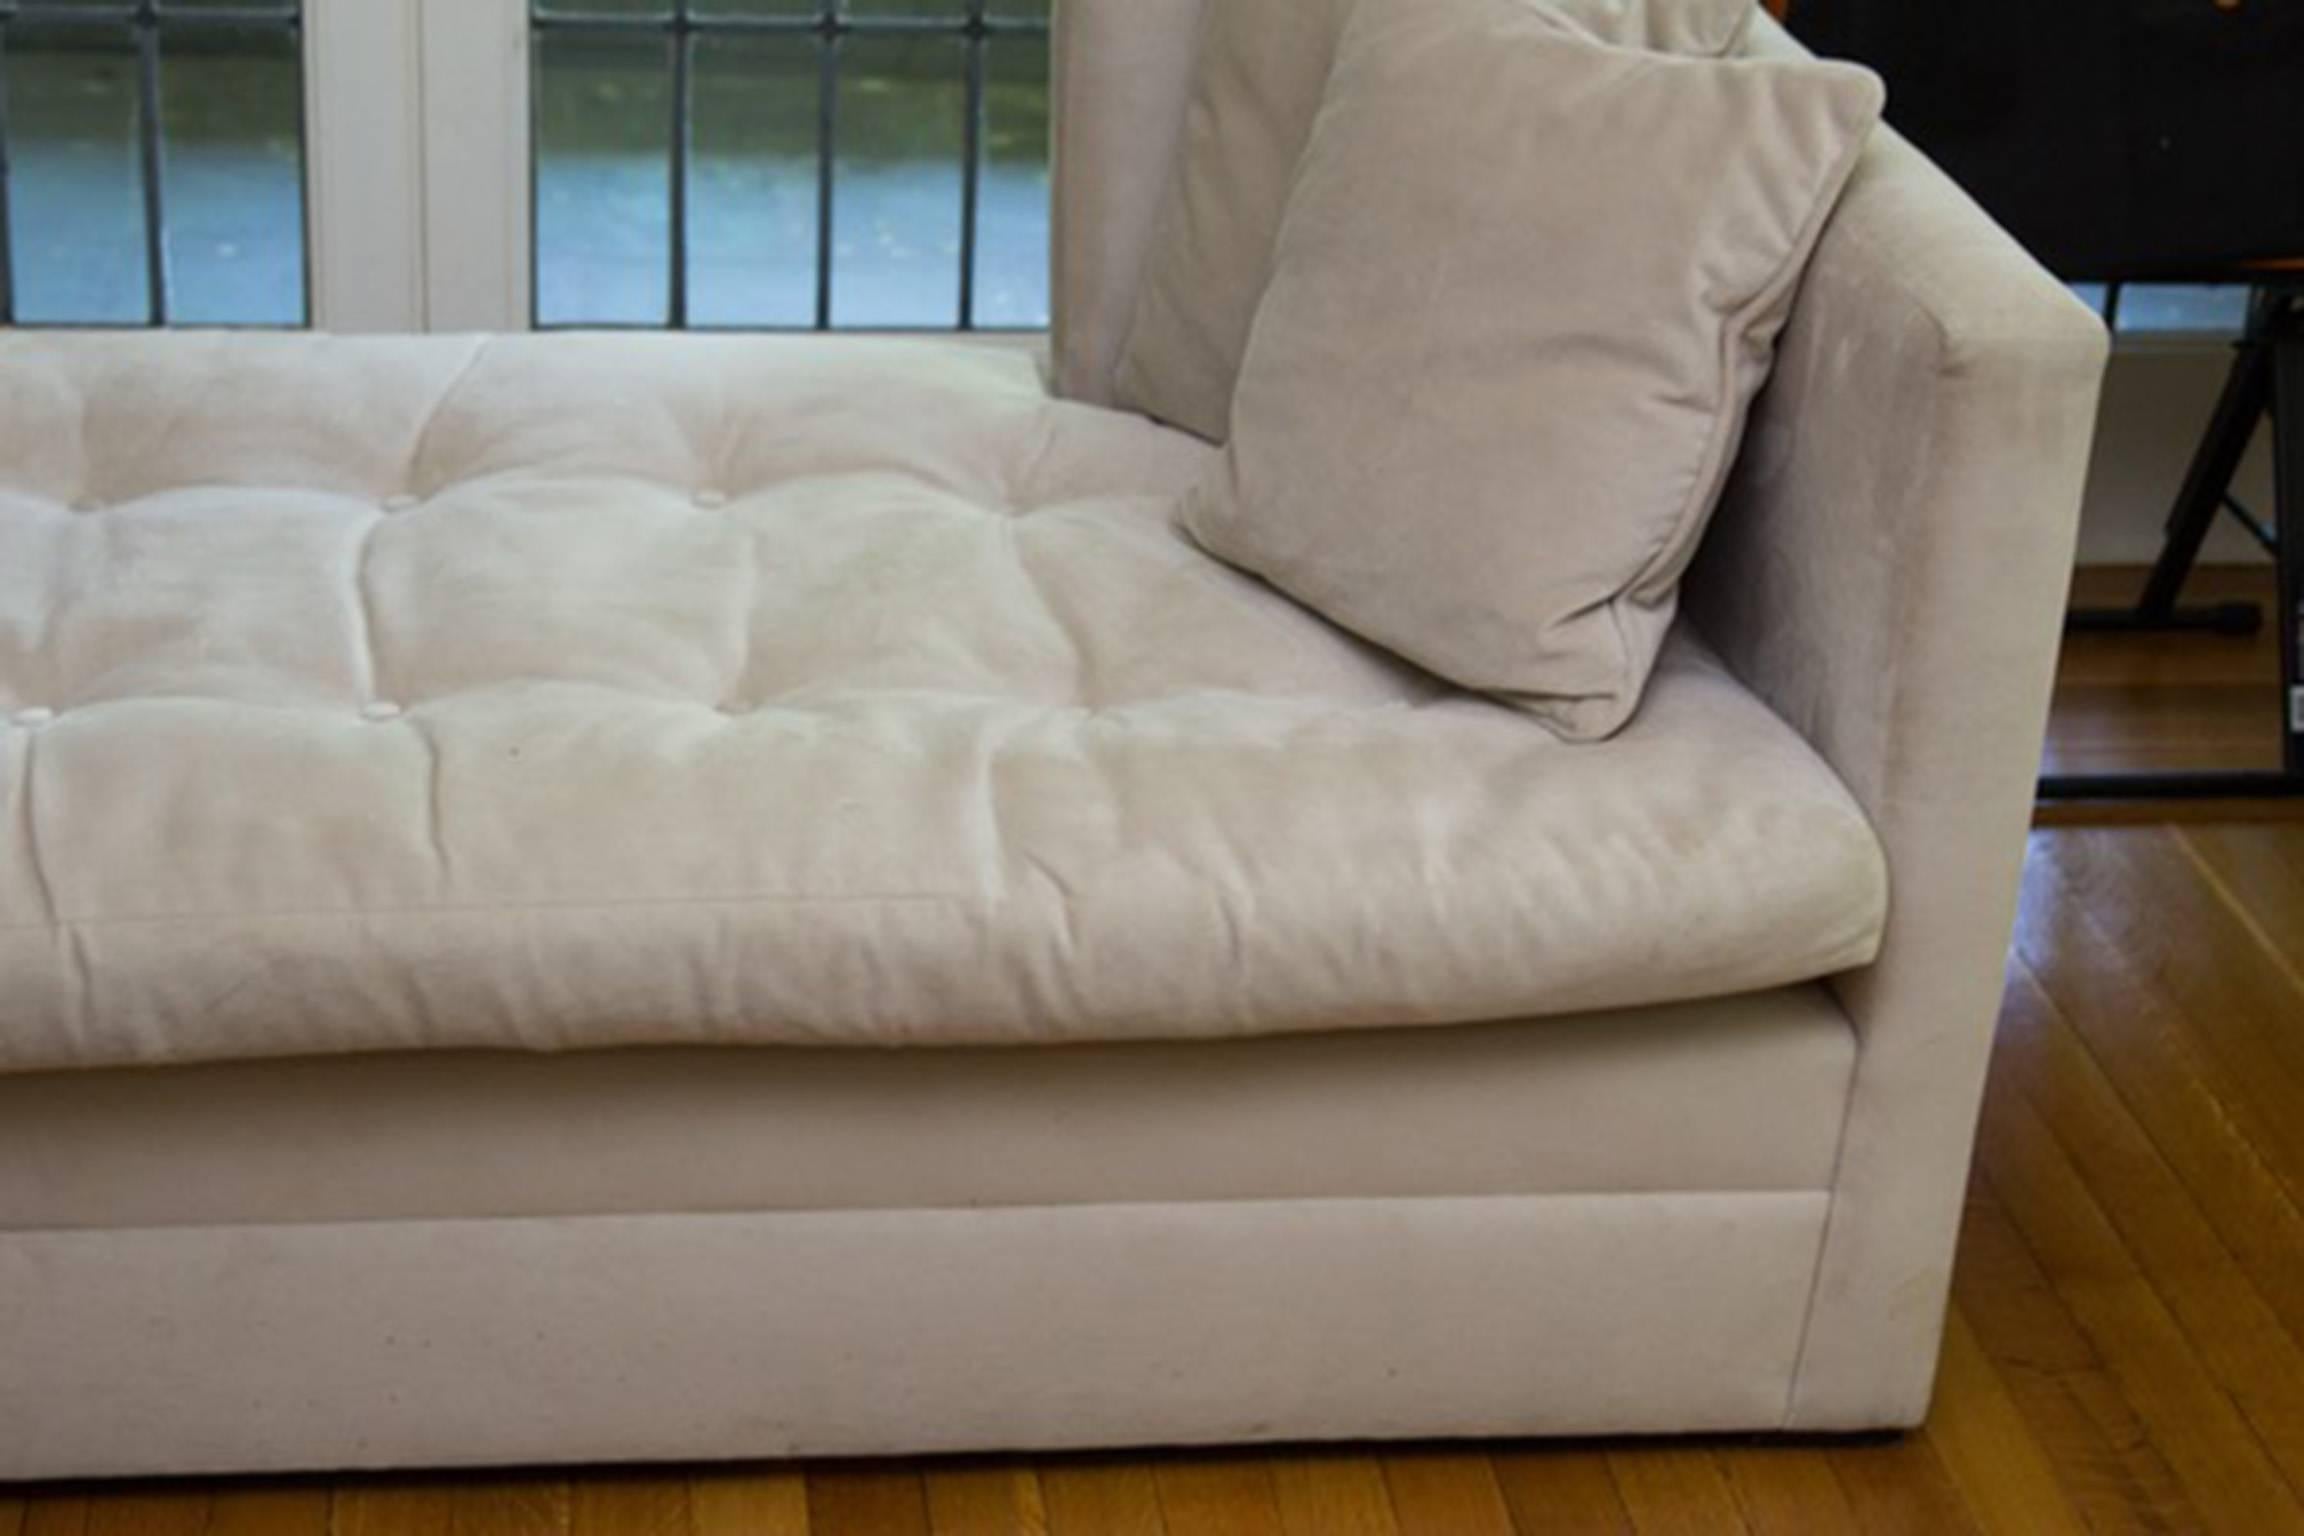 A Bromwell custom, down-filled daybed with pillows. It features lightly padded wraparound supports, a removable button-tufted cushion and block feet. The piece is covered with suede-like beige upholstery. Includes four matching pillows.